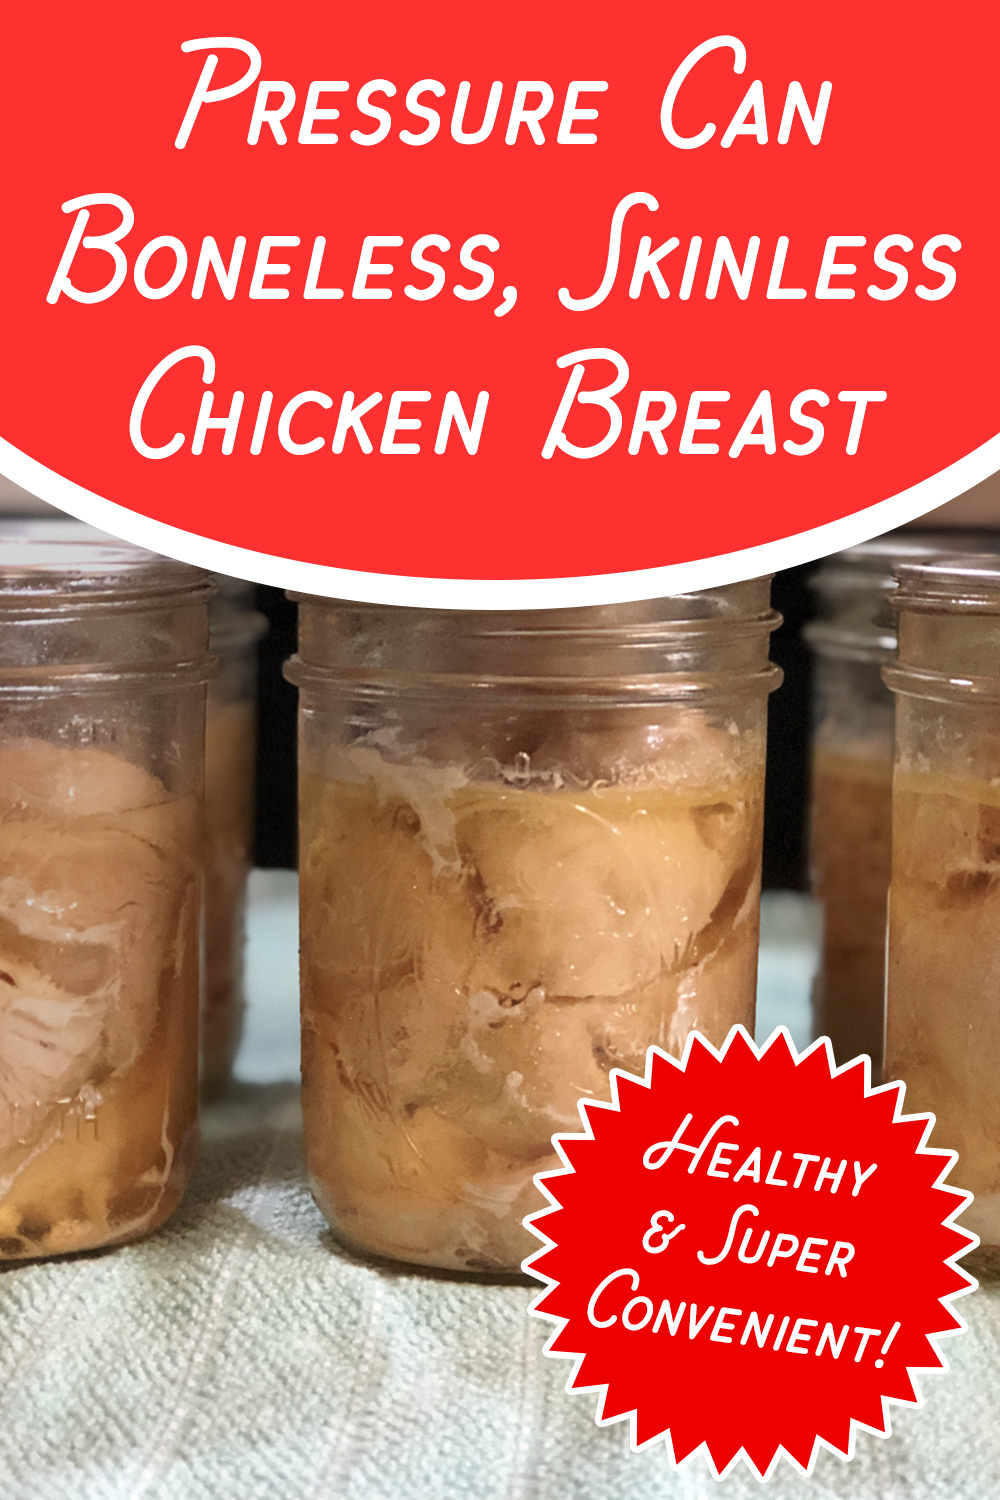 How to Pressure Can Boneless Chicken Breast